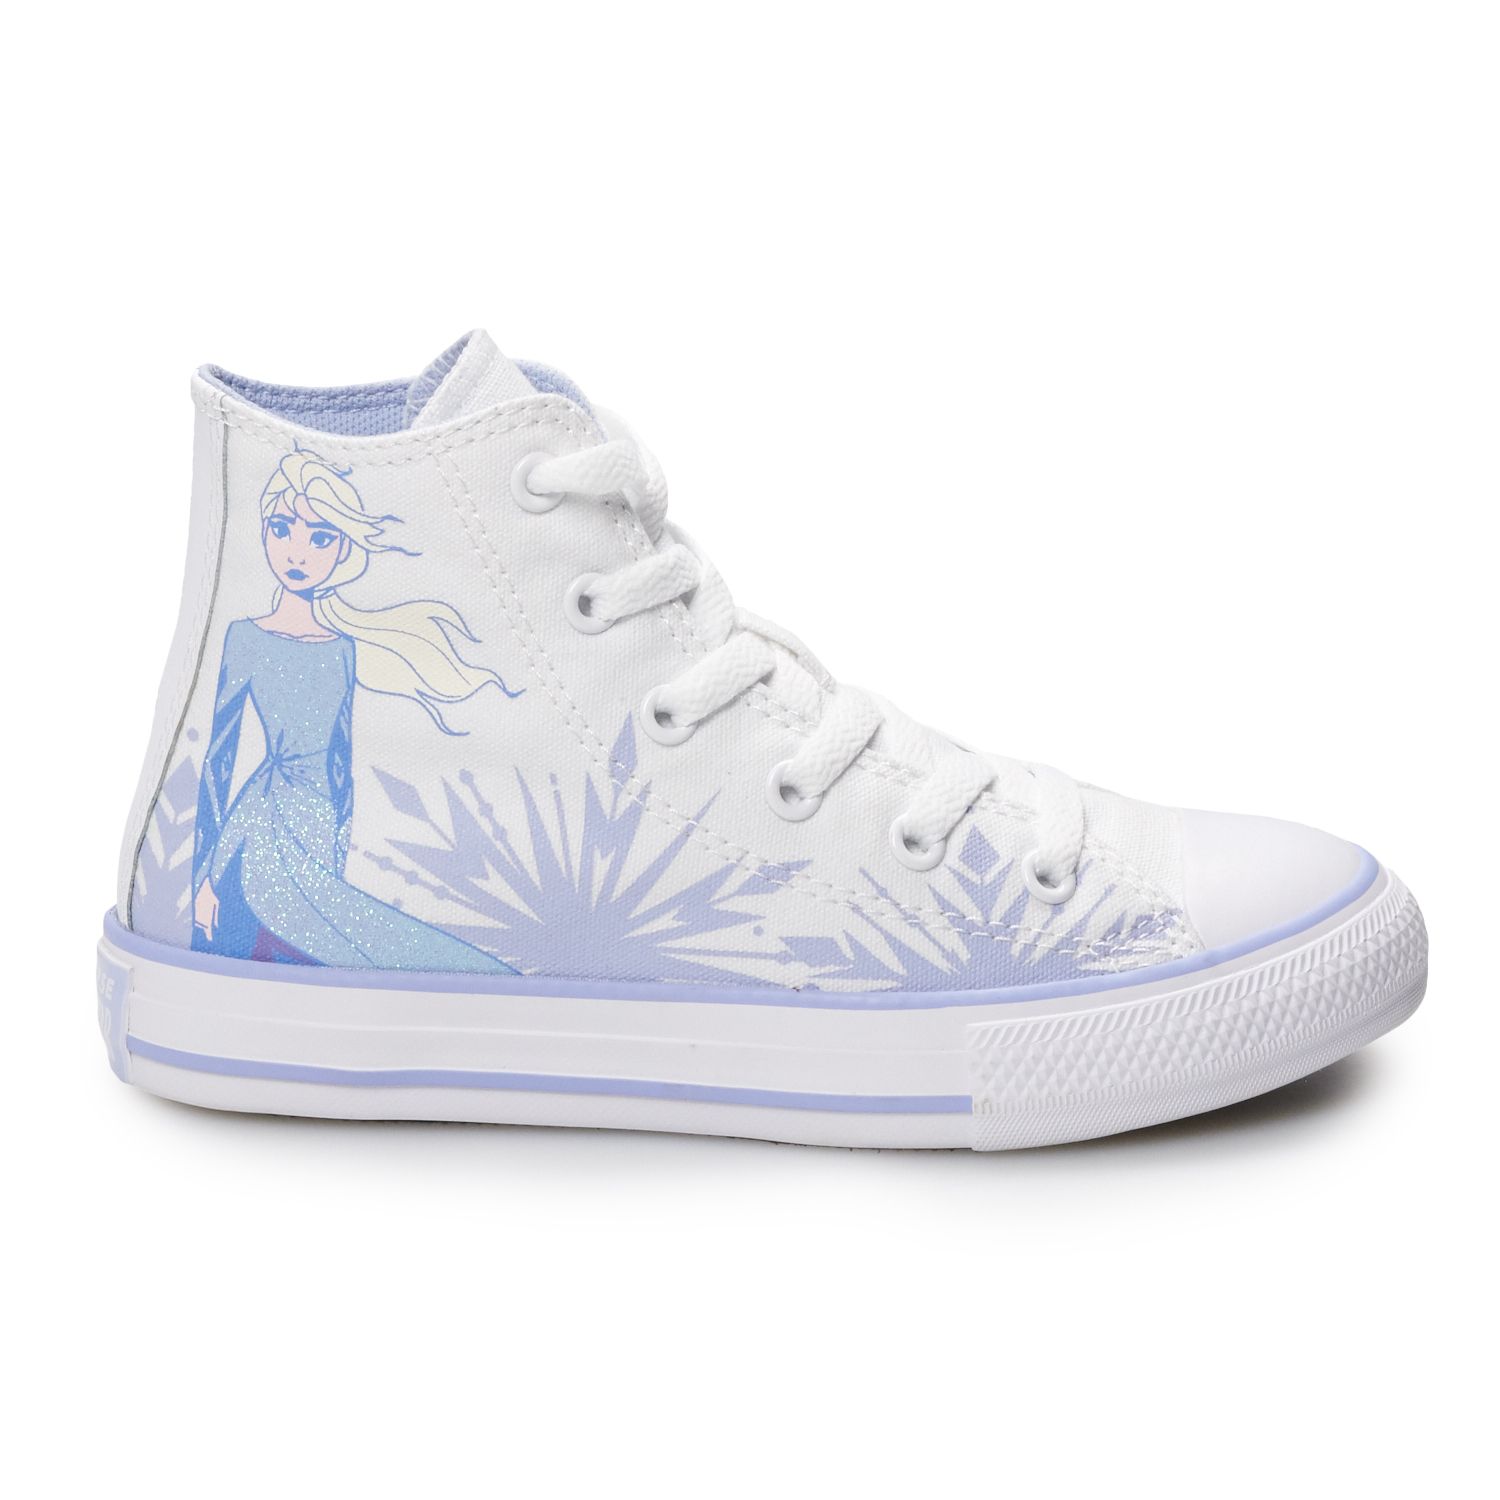 converse all star for girls blue